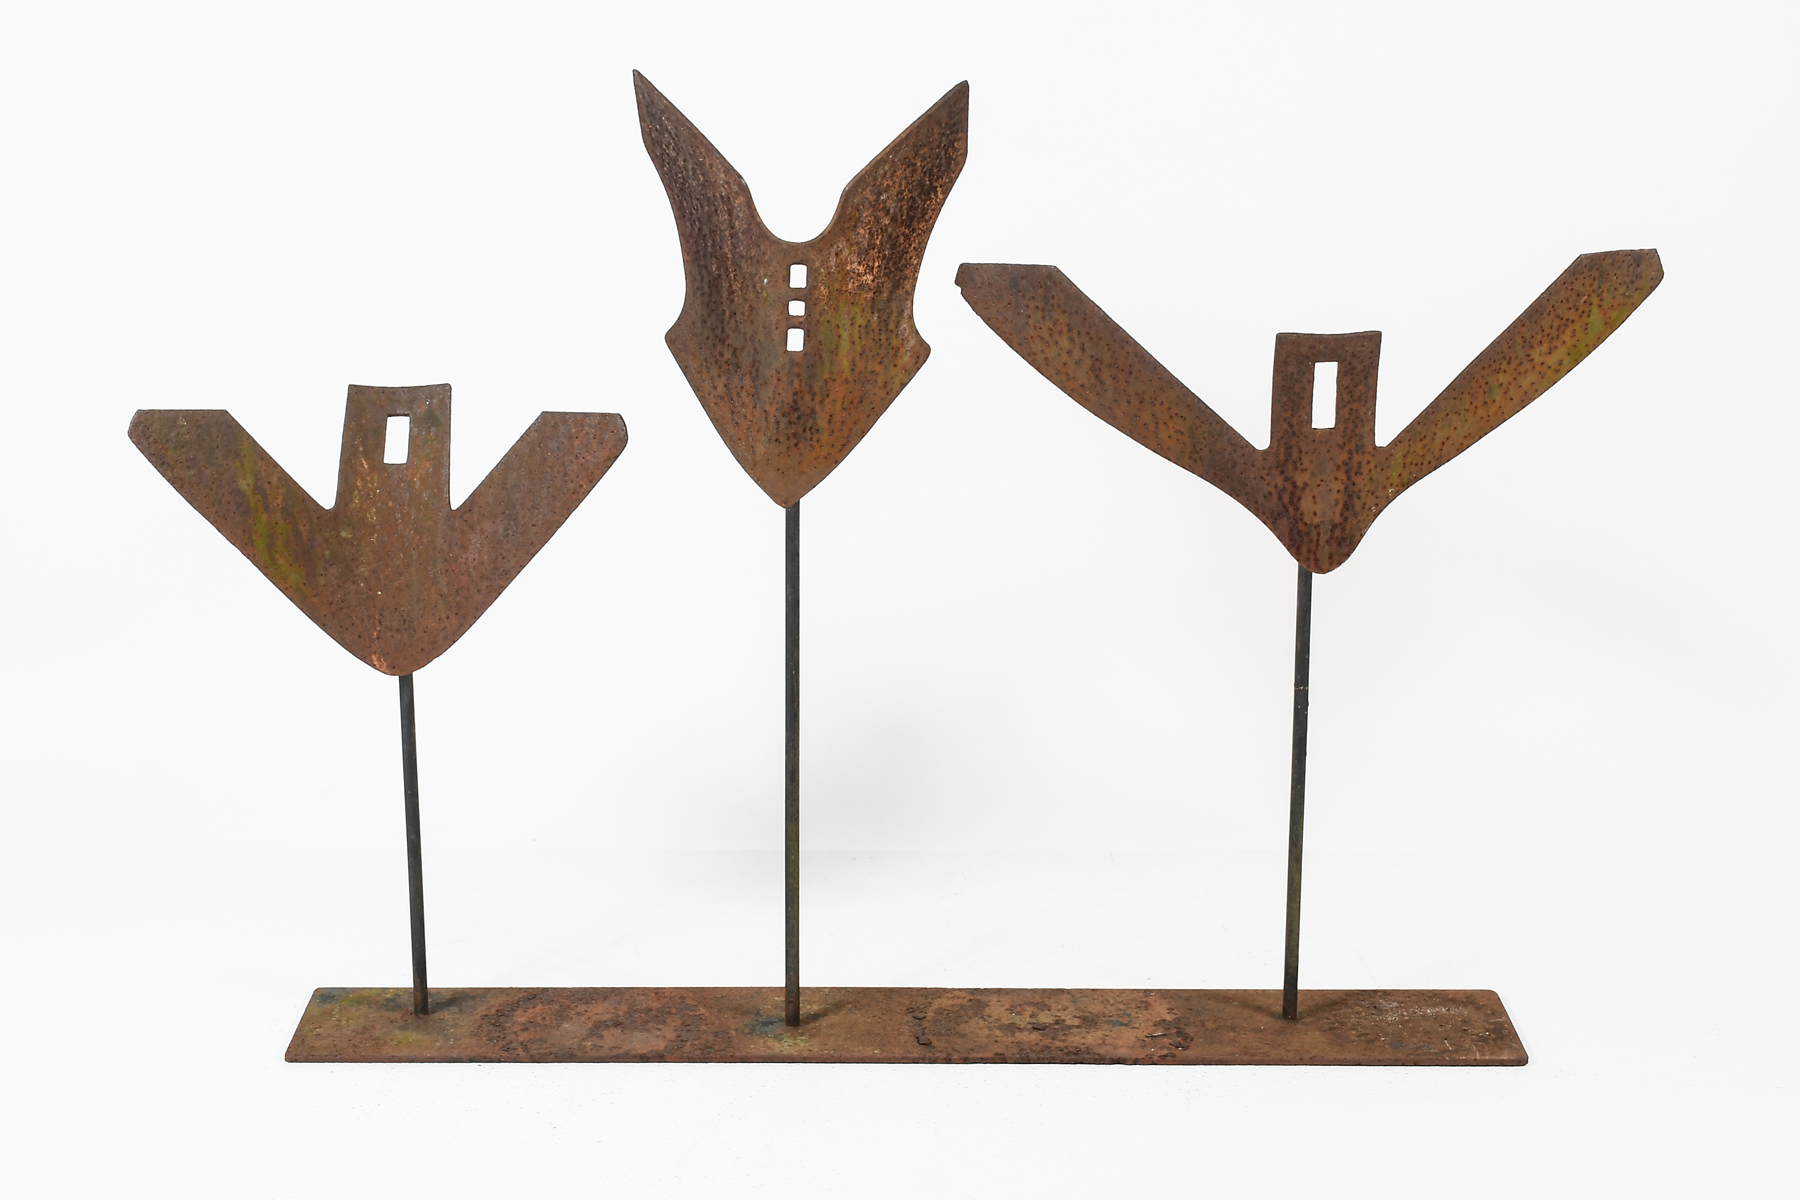 MID-CENTURY MODERN ABSTRACT WELDED